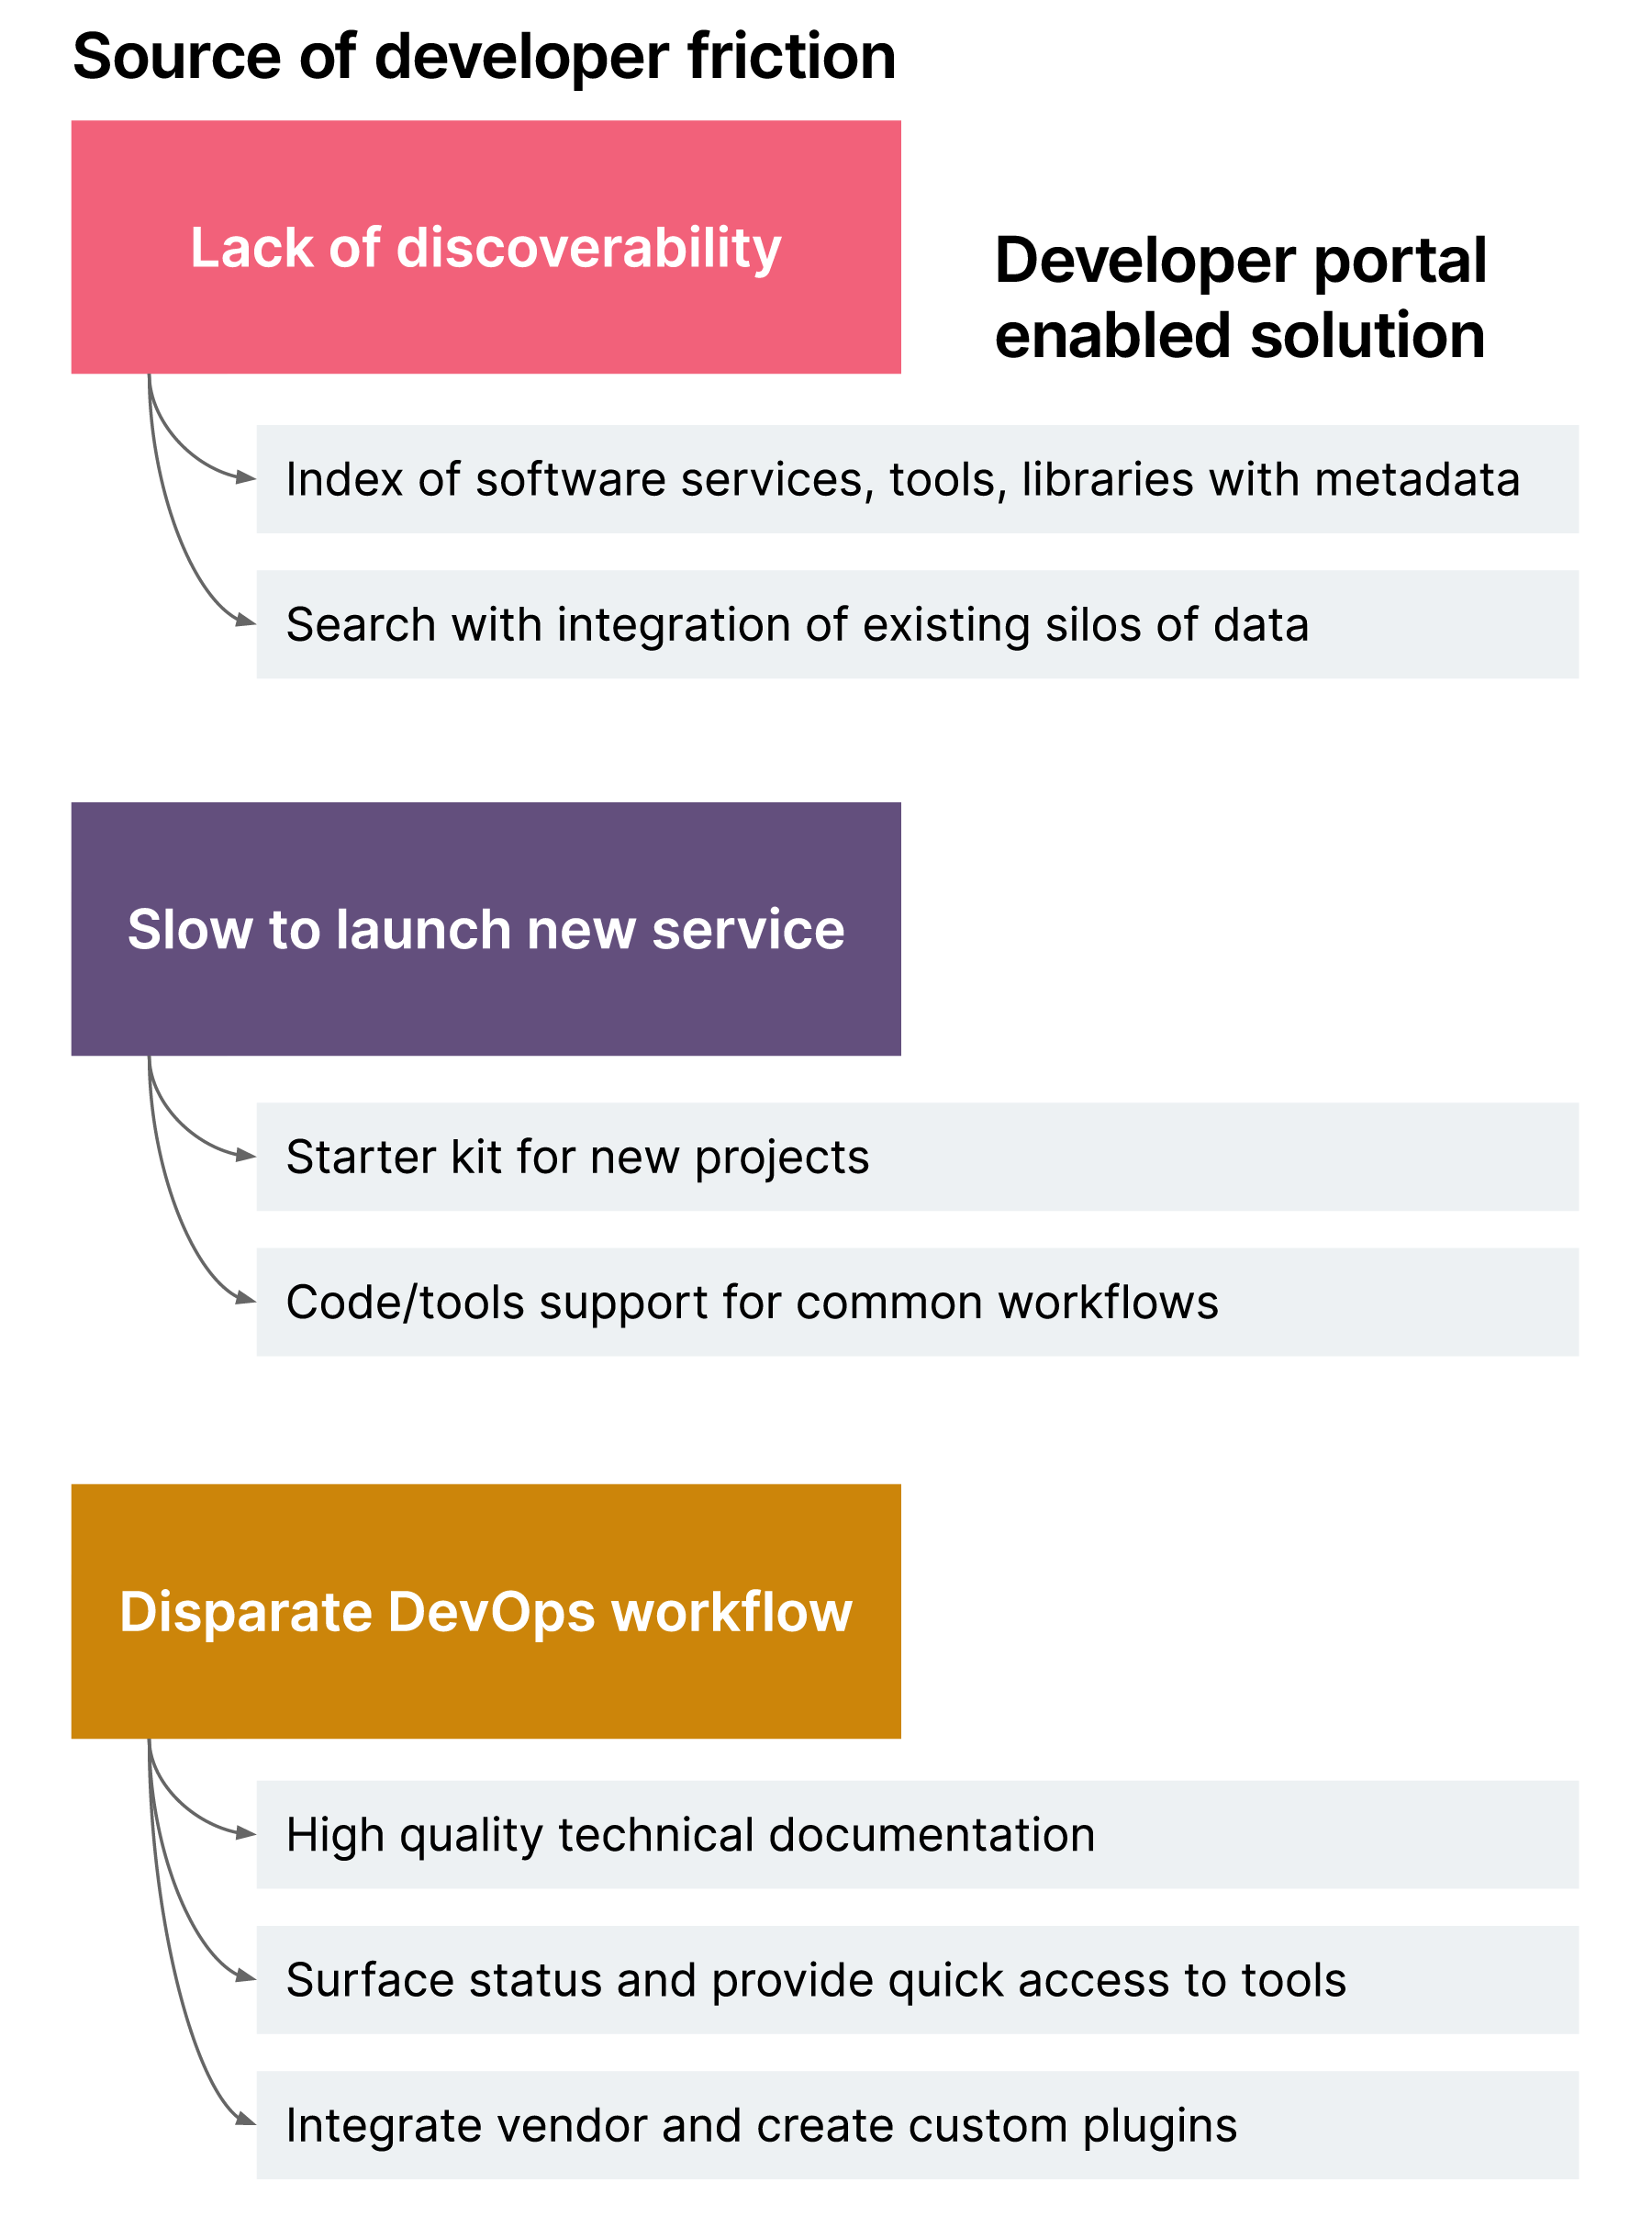 Sources of developer friction include lack of discoverability, slow to launch new service, and disparate DevOps workflow. Developer portals enables solutions for these frictions.